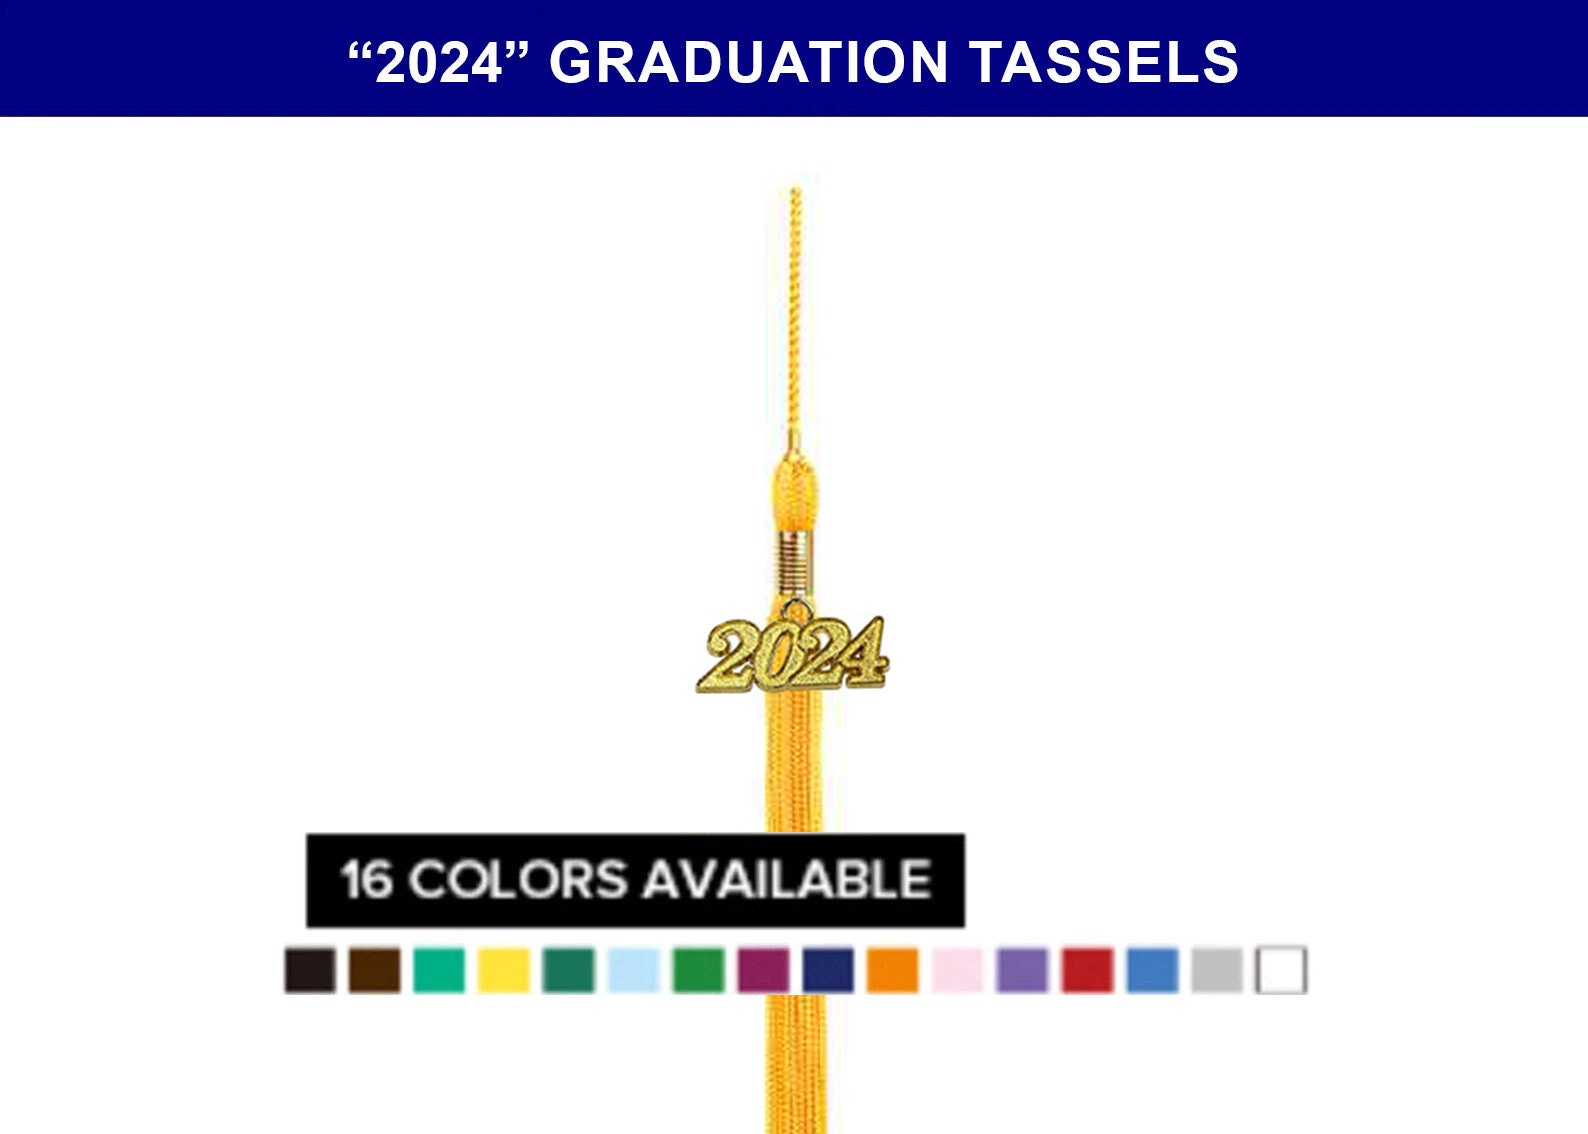 Single Color Graduation Tassel With 2024 Year Date Drop All Single